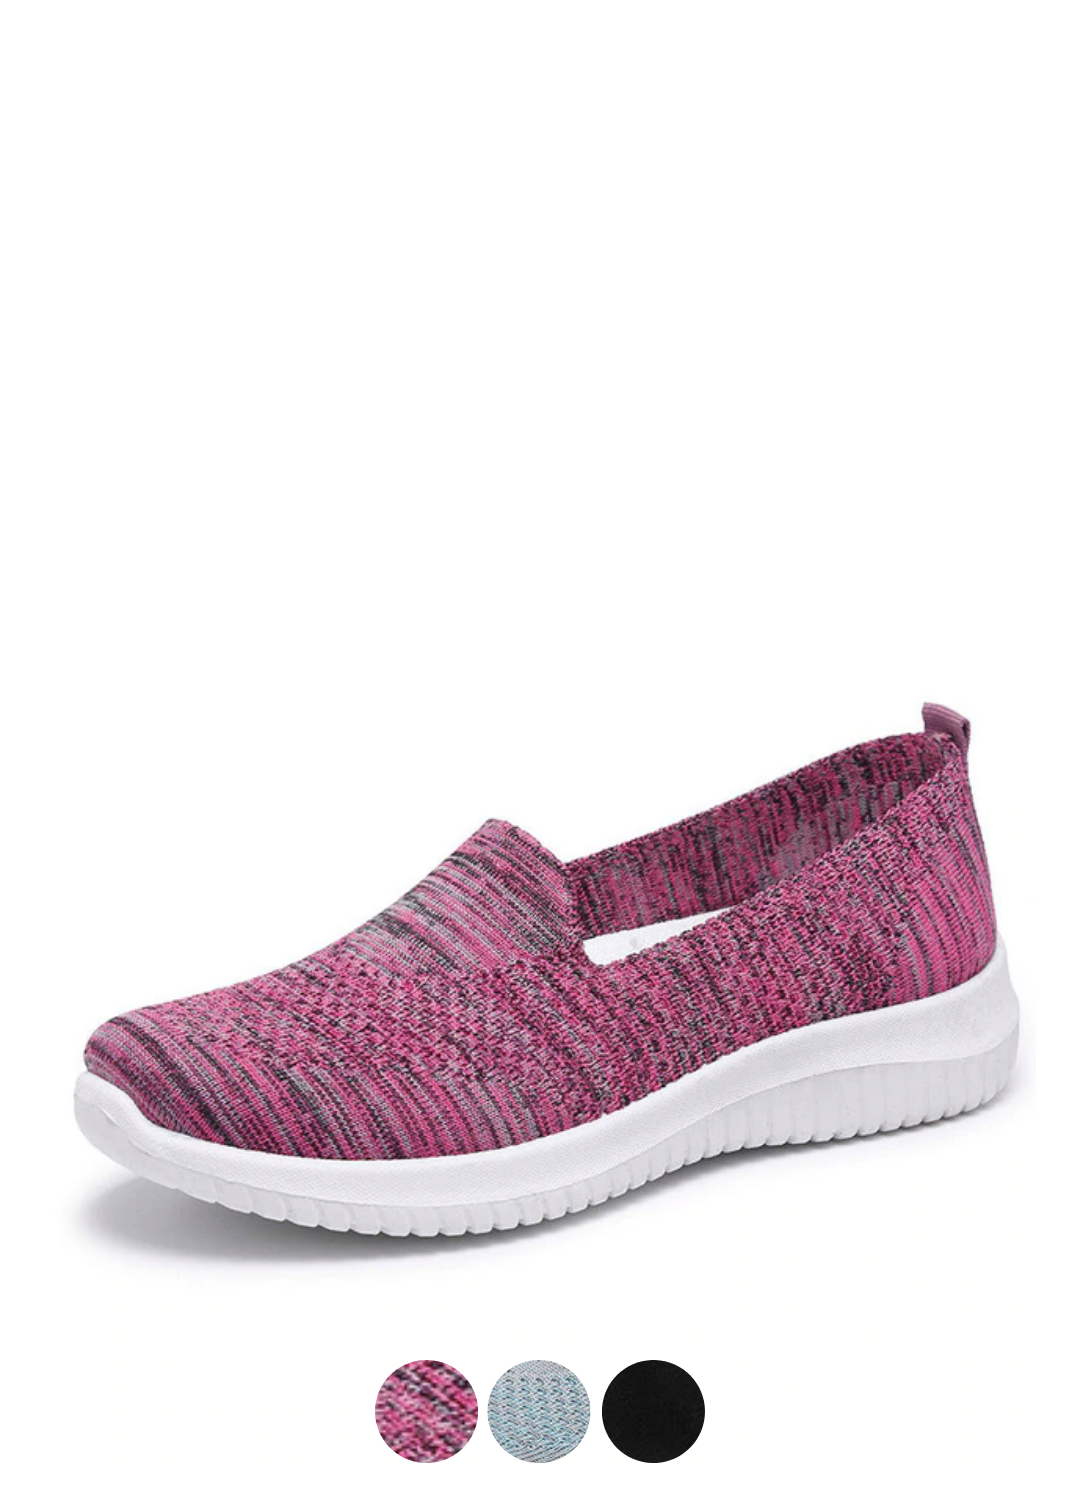 Nubia Women's Slip-On Shoes | Ultrasellershoes.com – USS® Shoes